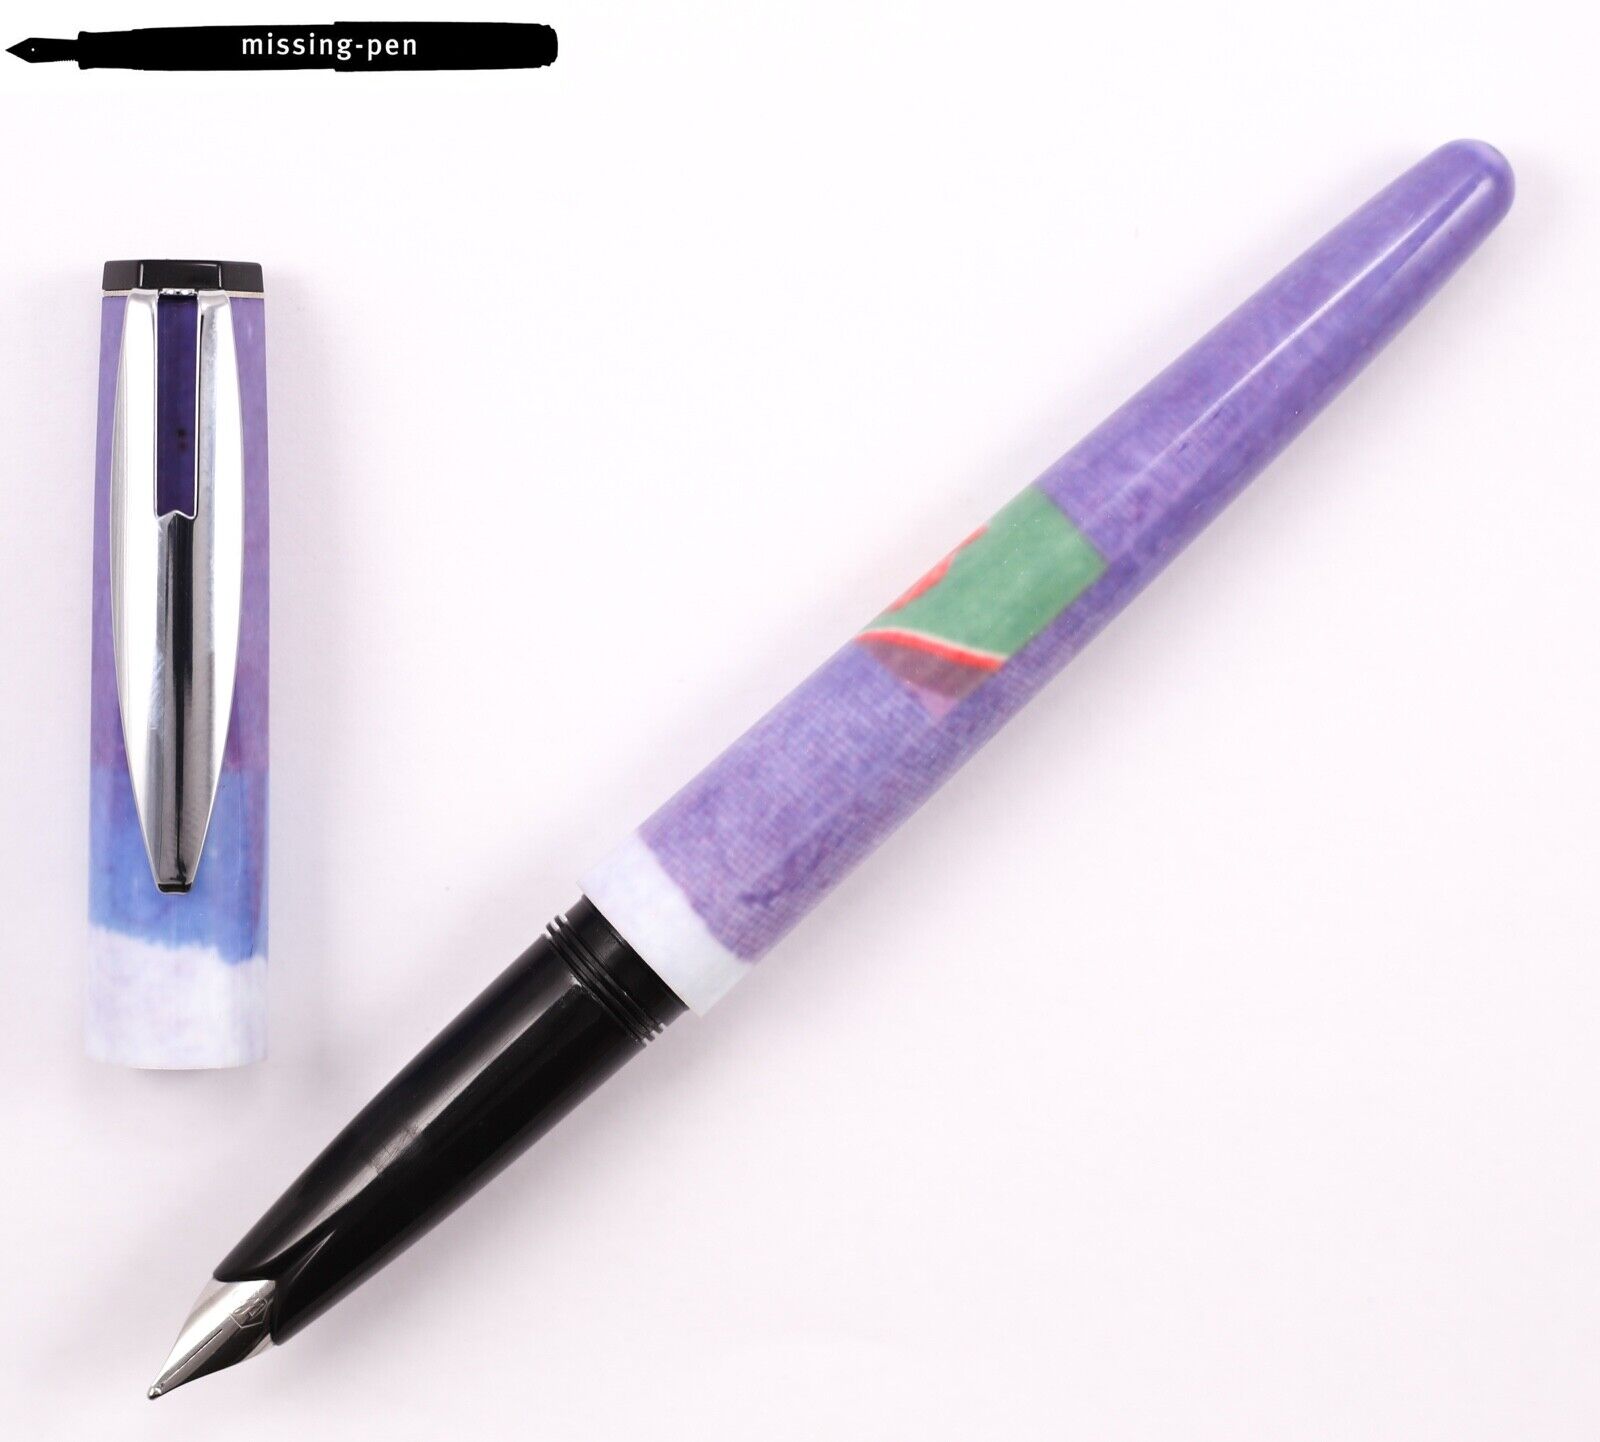 Waterman Reflex Fountain Pen in Purple with M-nib from the 1990’s